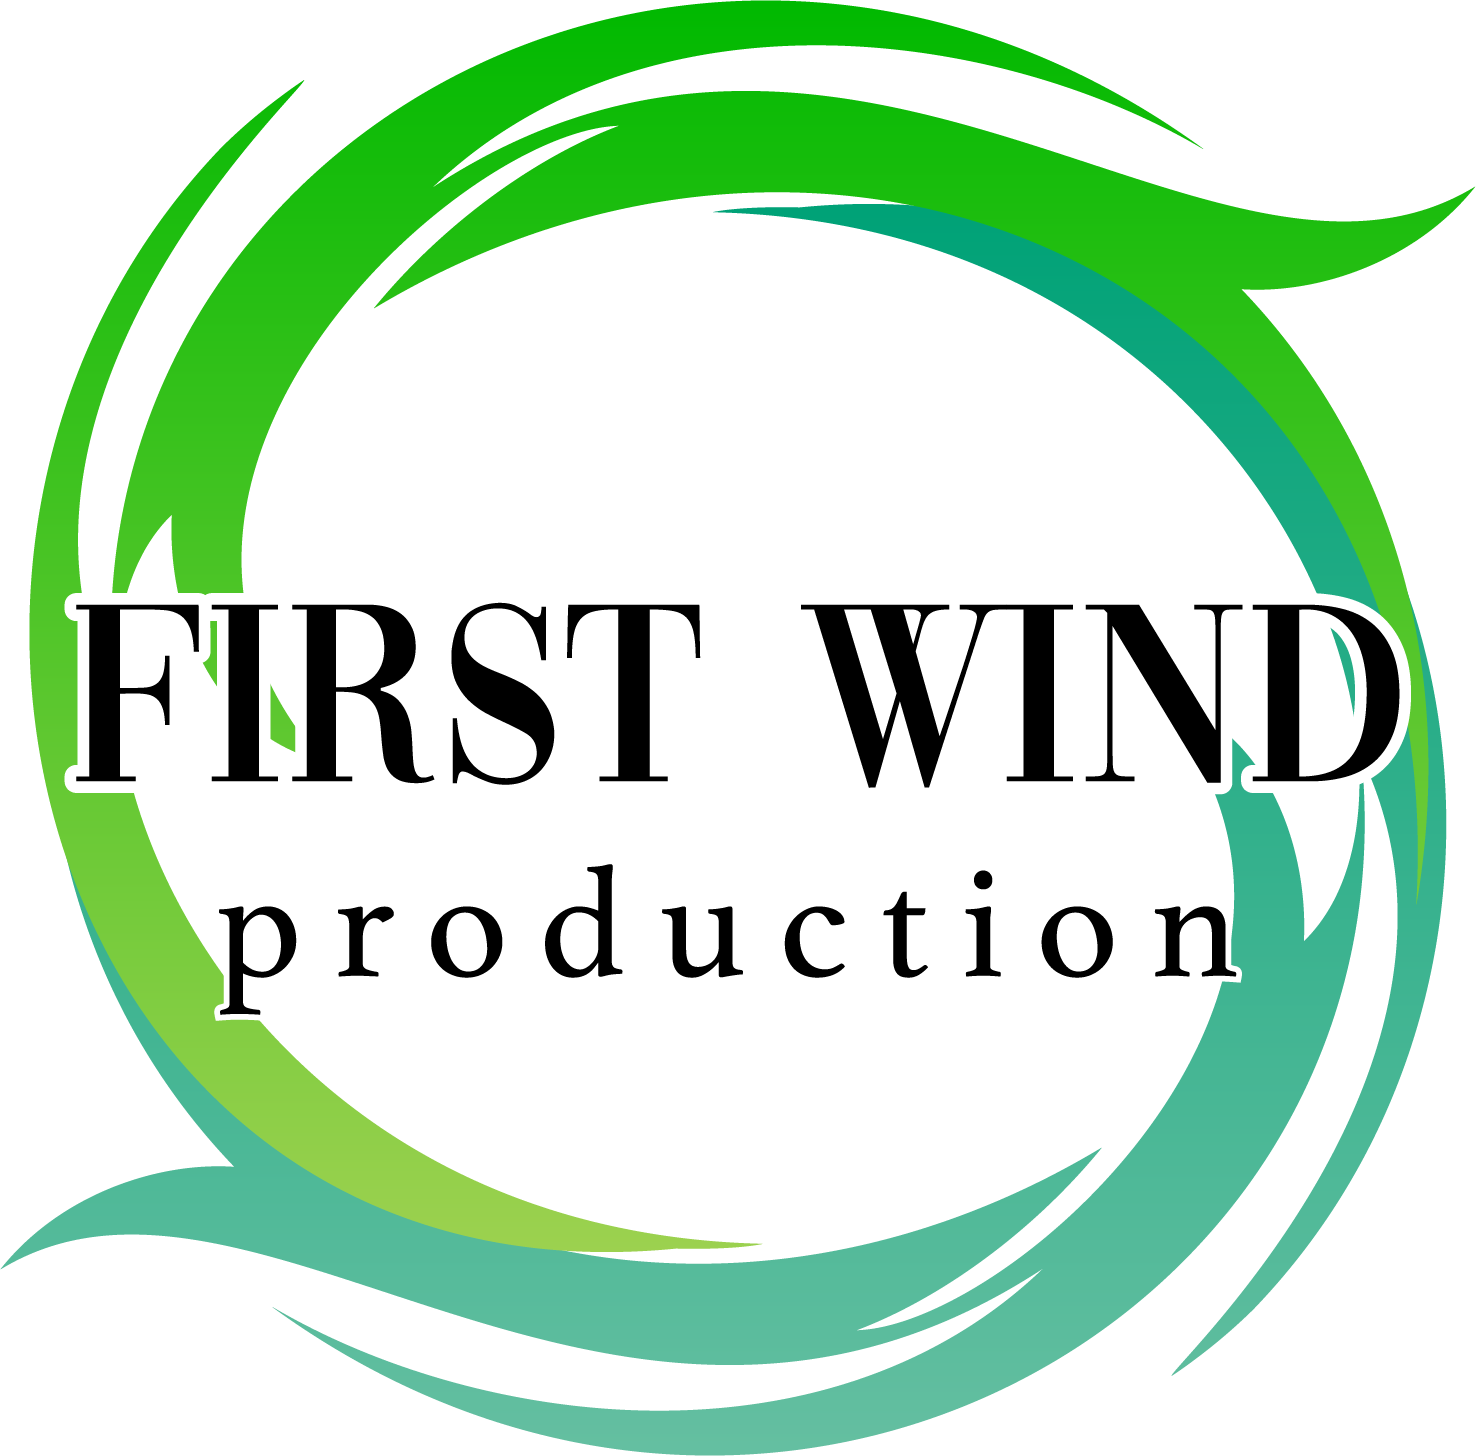 FIRST WIND production